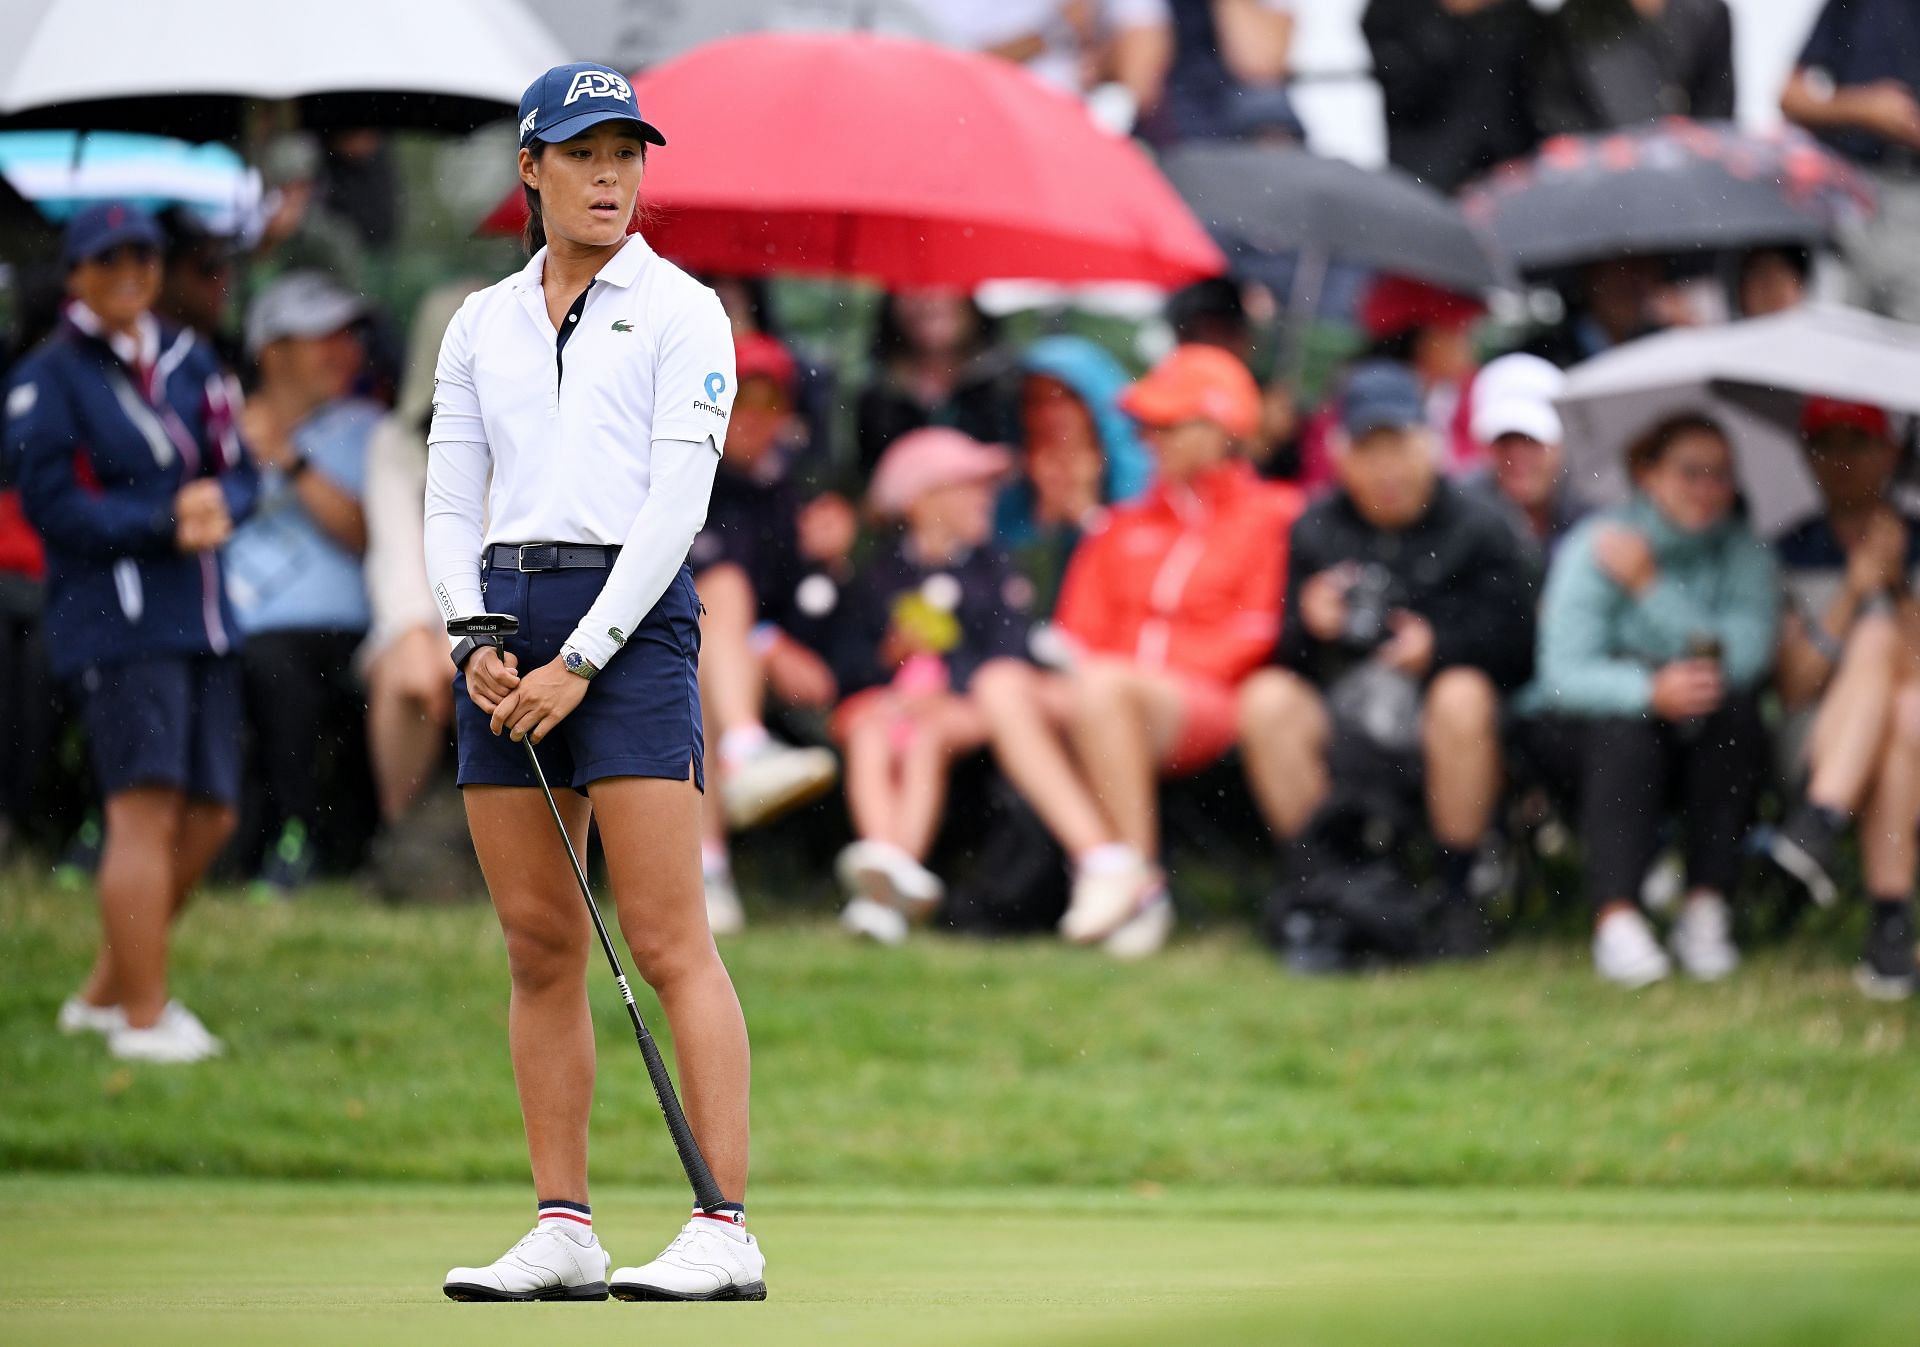 Celine Boutier takes 3shot lead at 2023 Amundi Evian Championship in